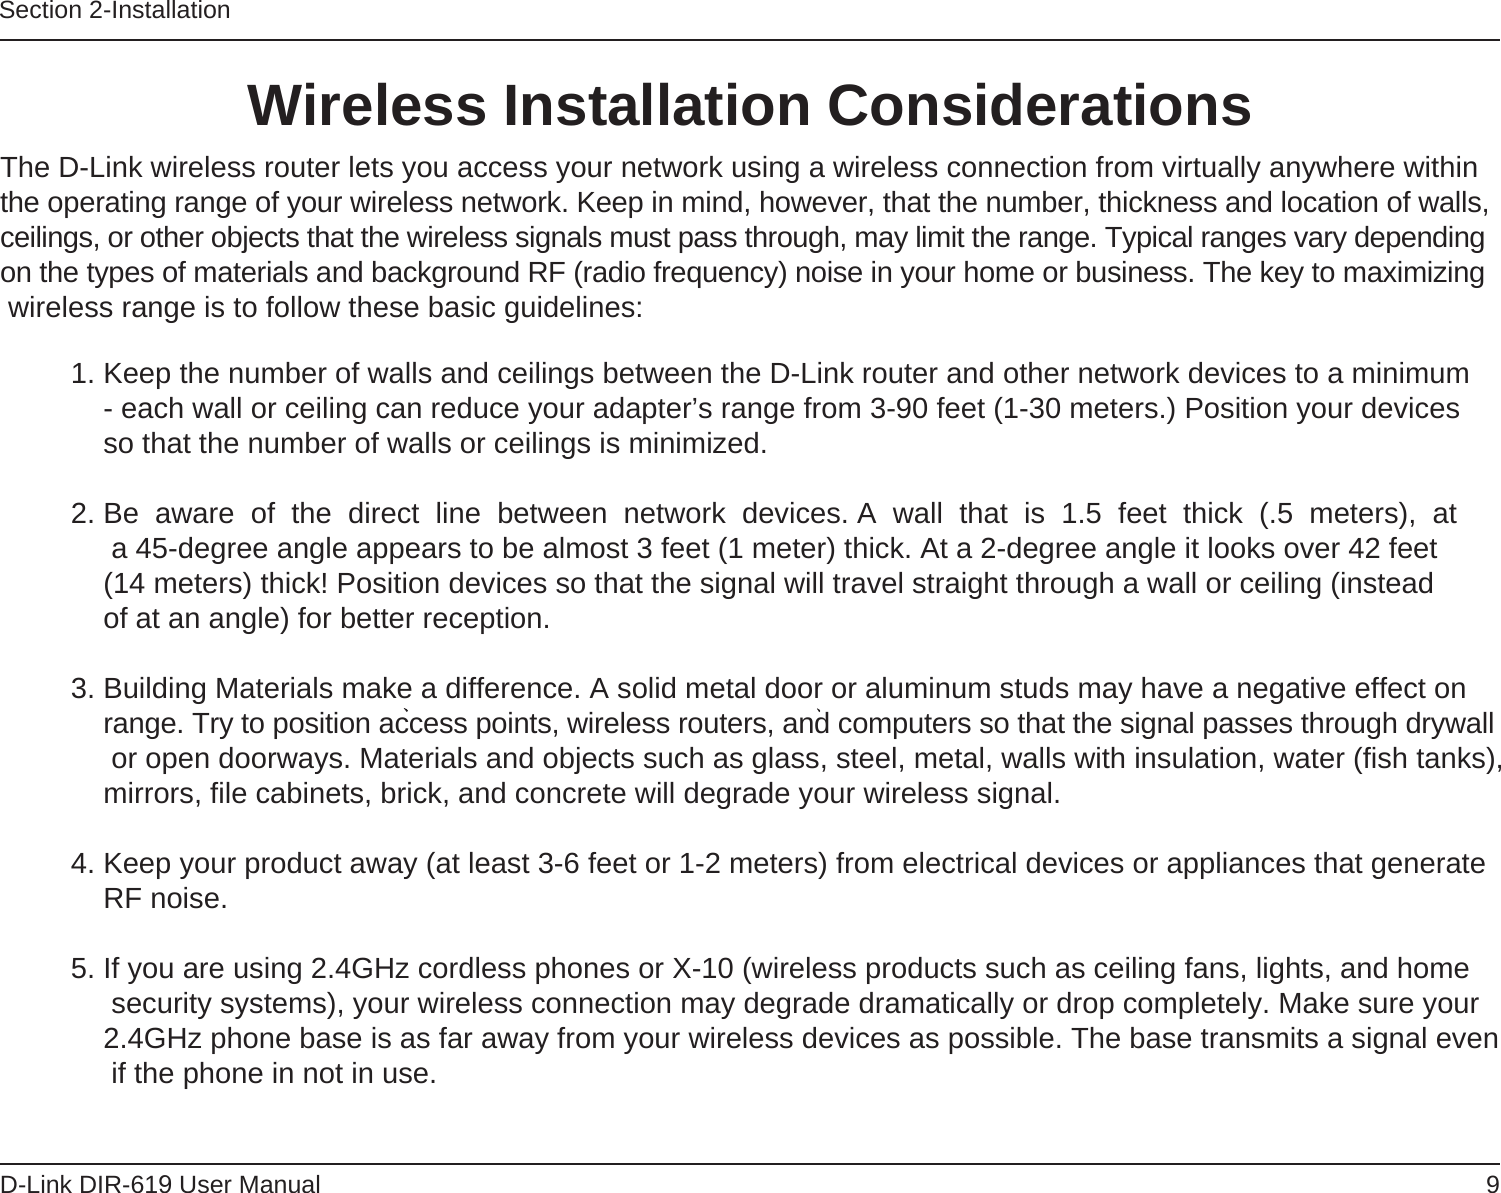 9D-Link DIR-619 User ManualSection 2-InstallationWireless Installation Considerations               The D-Link wireless router lets you access your network using a wireless connection from virtually anywhere withinthe operating range of your wireless network. Keep in mind, however, that the number, thickness and location of walls, ceilings, or other objects that the wireless signals must pass through, may limit the range. Typical ranges vary dependingon the types of materials and background RF (radio frequency) noise in your home or business. The key to maximizing wireless range is to follow these basic guidelines: 1. Keep the number of walls and ceilings between the D-Link router and other network devices to a minimum- each wall or ceiling can reduce your adapter’s range from 3-90 feet (1-30 meters.) Position your devicesso that the number of walls or ceilings is minimized.2. Be  aware  of  the  direct  line  between  network  devices. A  wall  that  is  1.5  feet  thick  (.5  meters),  at  a 45-degree angle appears to be almost 3 feet (1 meter) thick. At a 2-degree angle it looks over 42 feet(14 meters) thick! Position devices so that the signal will travel straight through a wall or ceiling (insteadof at an angle) for better reception.3. Building Materials make a difference. A solid metal door or aluminum studs may have a negative effect on range. Try to position access points, wireless routers, and computers so that the signal passes through drywall or open doorways. Materials and objects such as glass, steel, metal, walls with insulation, water (fish tanks), mirrors, file cabinets, brick, and concrete will degrade your wireless signal.4. Keep your product away (at least 3-6 feet or 1-2 meters) from electrical devices or appliances that generate RF noise.5. If you are using 2.4GHz cordless phones or X-10 (wireless products such as ceiling fans, lights, and home security systems), your wireless connection may degrade dramatically or drop completely. Make sure your 2.4GHz phone base is as far away from your wireless devices as possible. The base transmits a signal even if the phone in not in use.      